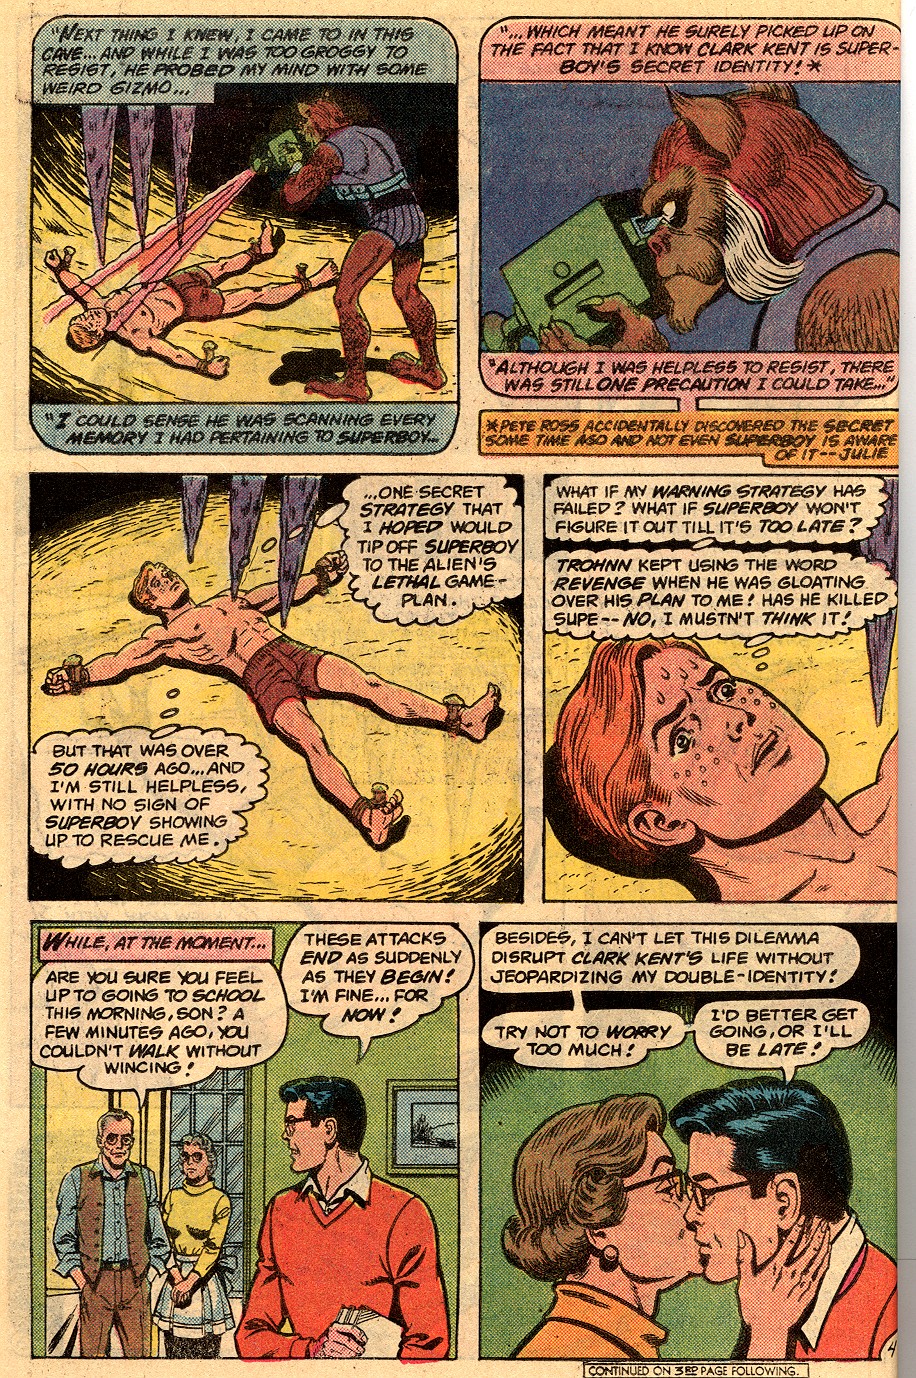 The New Adventures of Superboy 33 Page 5